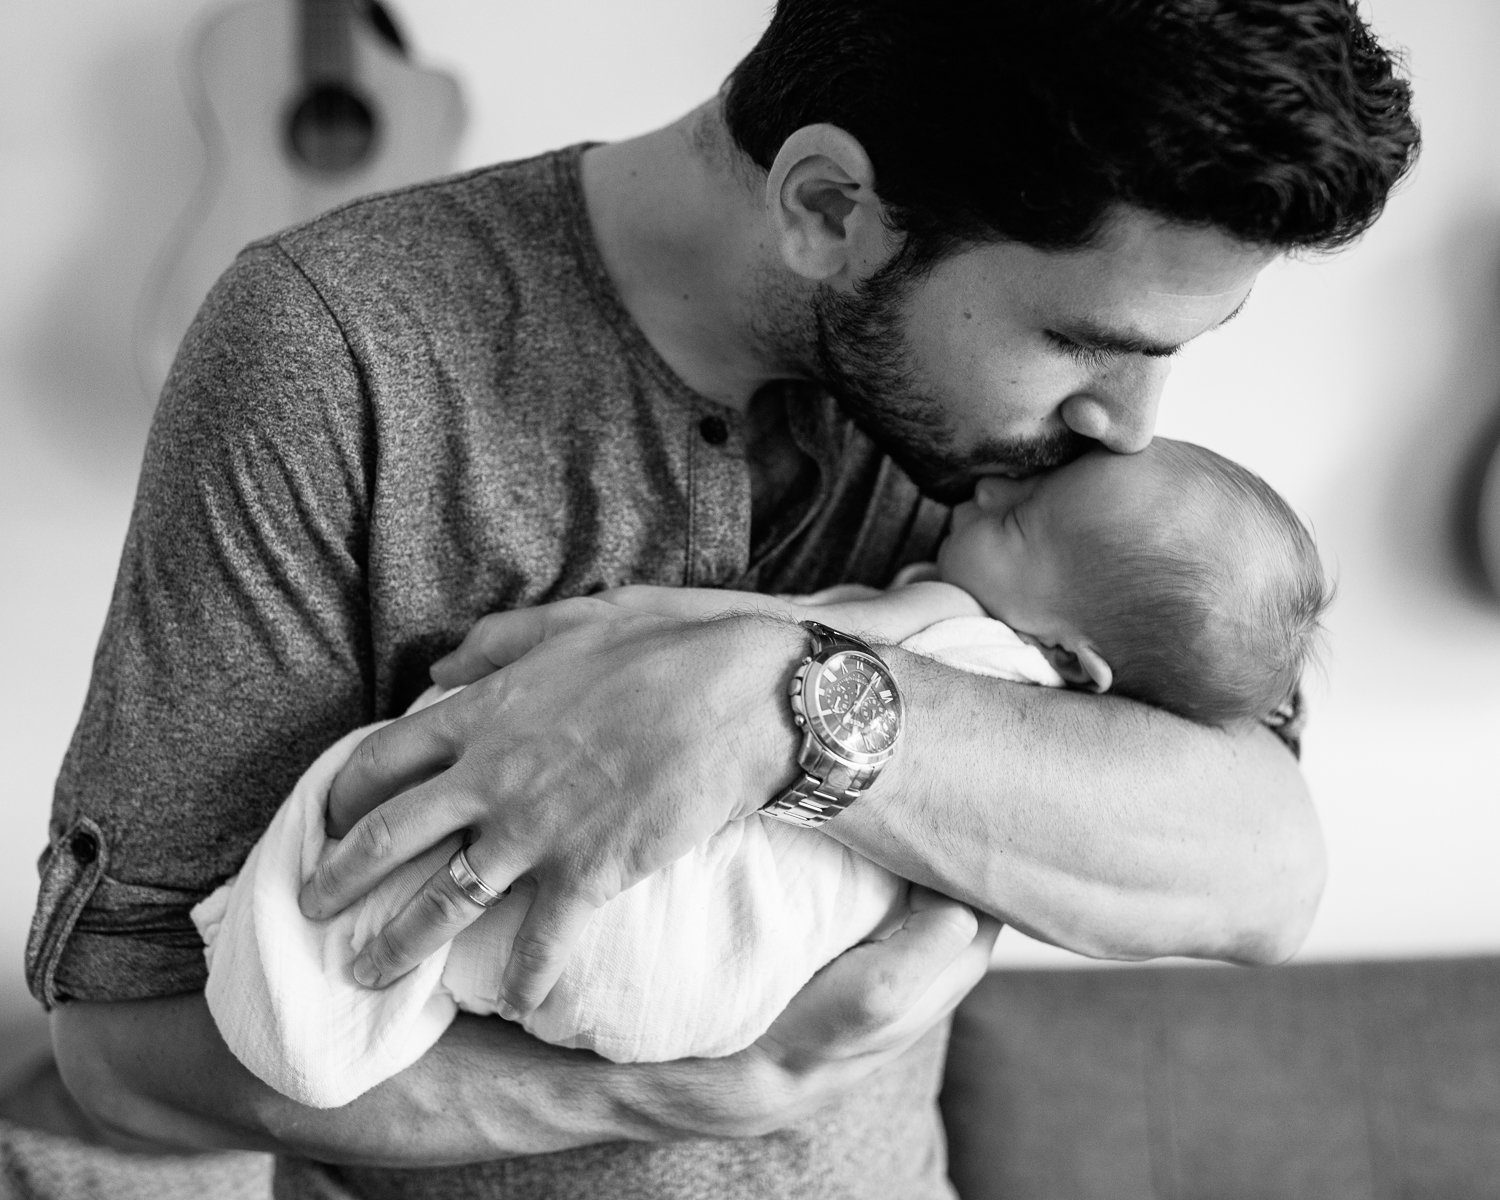 new dad standing in living room, holding 2 week old sleeping baby boy in white swaddle, kissing son on forehead - York Region Lifestyle Photography